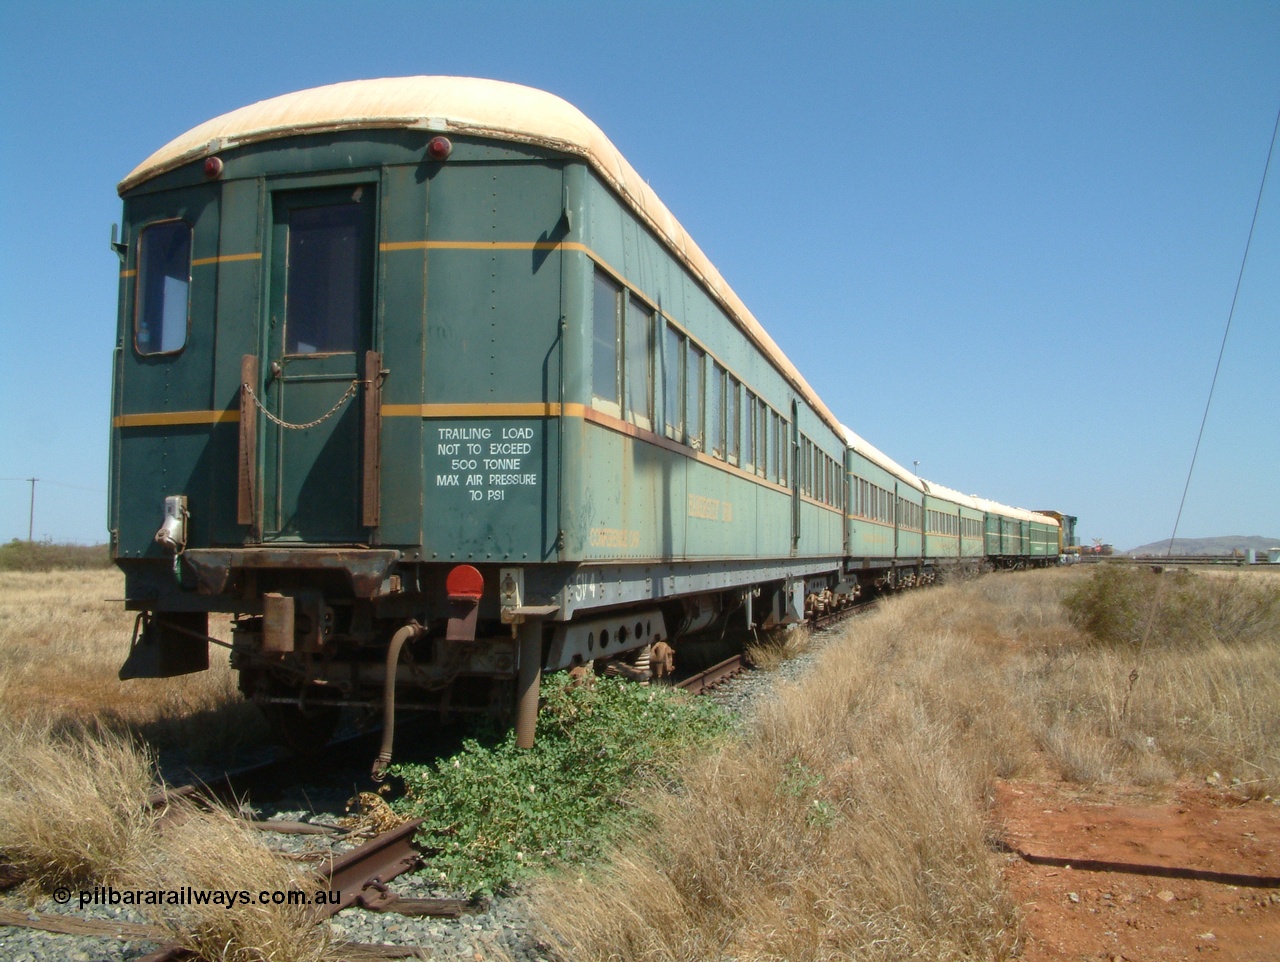 041014 141930
Pilbara Railways Historical Society, view along the passenger carriages, closest is the 'Conference Car' with SV 4 still visible, originally built by Clyde Engineering at Granville NSW in 1935 for the NSWGR as a second class railway carriage FS type FS 2010. In 1975 it was purchased by Hamersley Iron and converted to an inspection vehicle SV 4. When donated to the Society it was repurposed as a conference car. 14th October 2004.
Keywords: FS2010;FS-type;Clyde-Engineering-Granville-NSW;